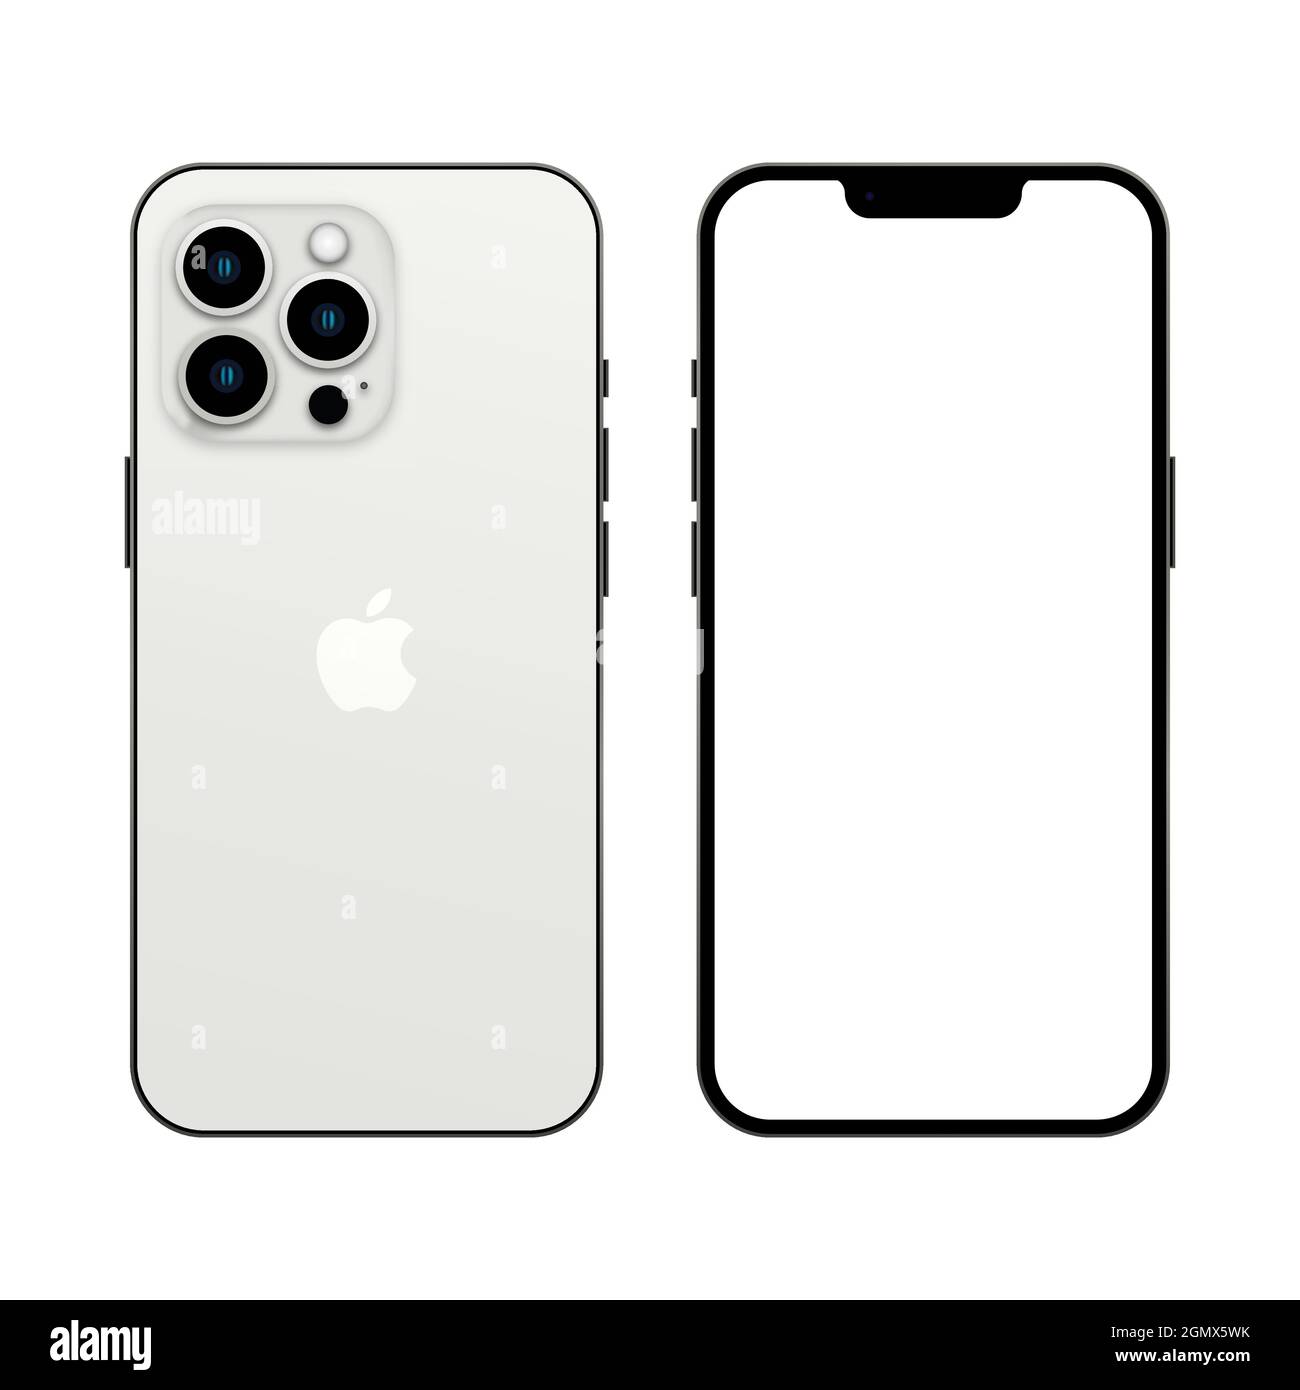 Vinnytsia, Ukraine - September 20, 2021. New iphone 13 pro silver color, front and back side. Smartphone mock up with white screen. Illustration for a Stock Vector